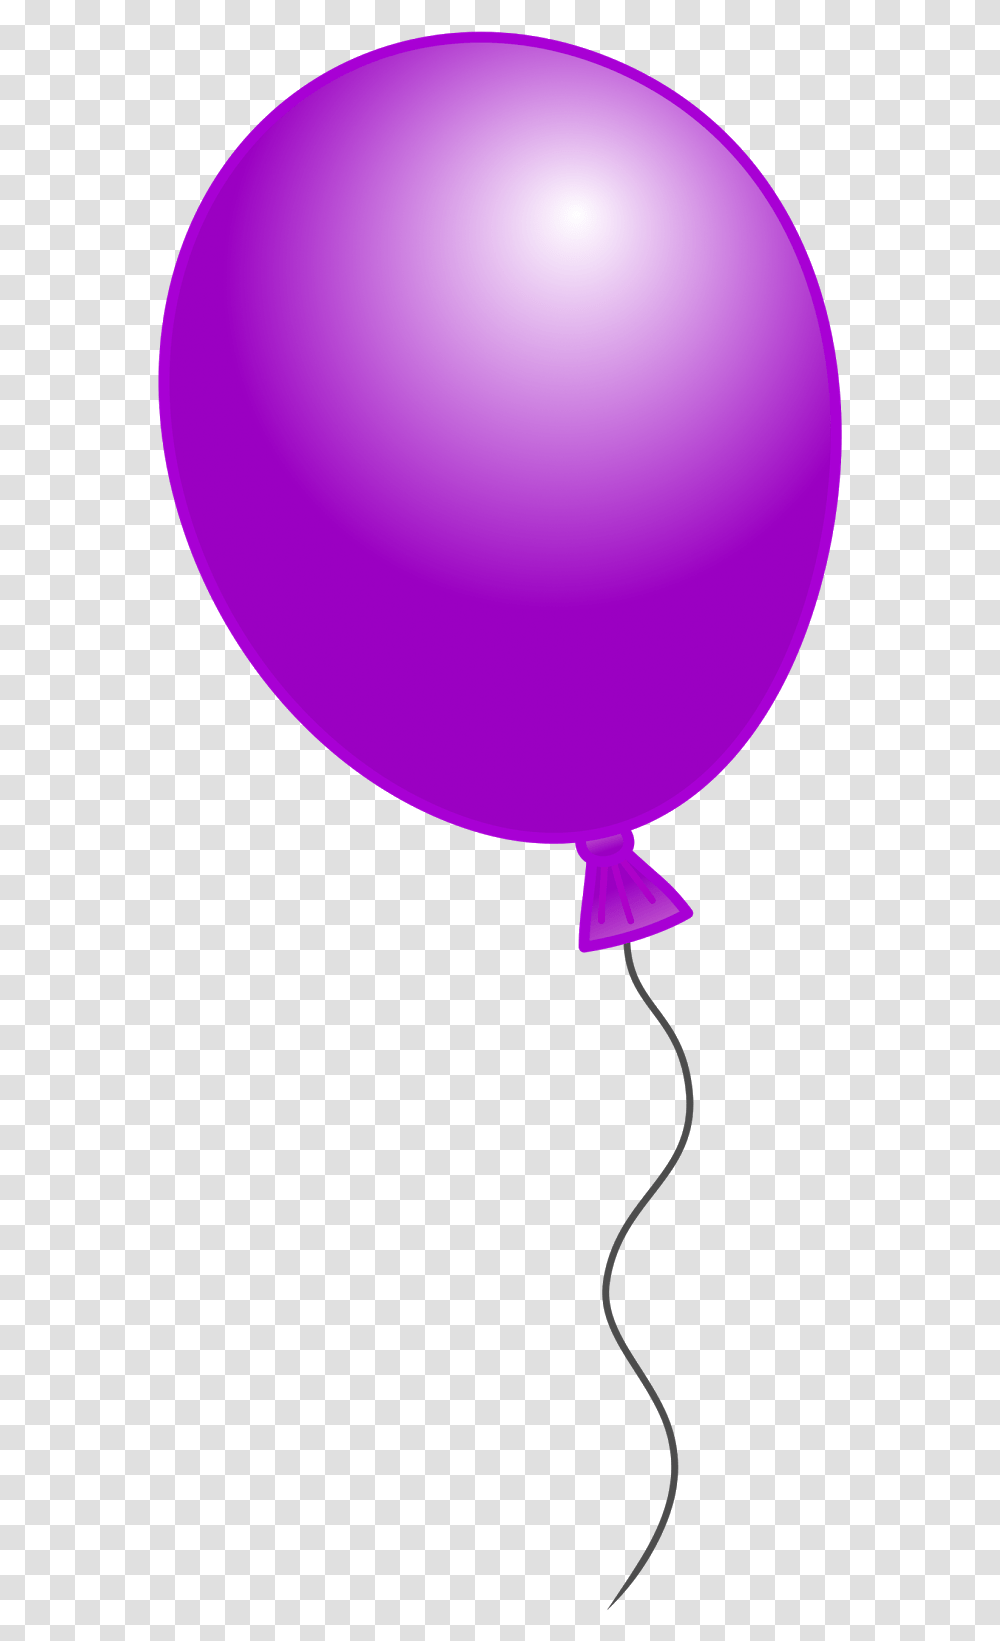 Cliparts Balloon Birthday Clipart Yespressinfo Single Balloon Clipart Transparent Png